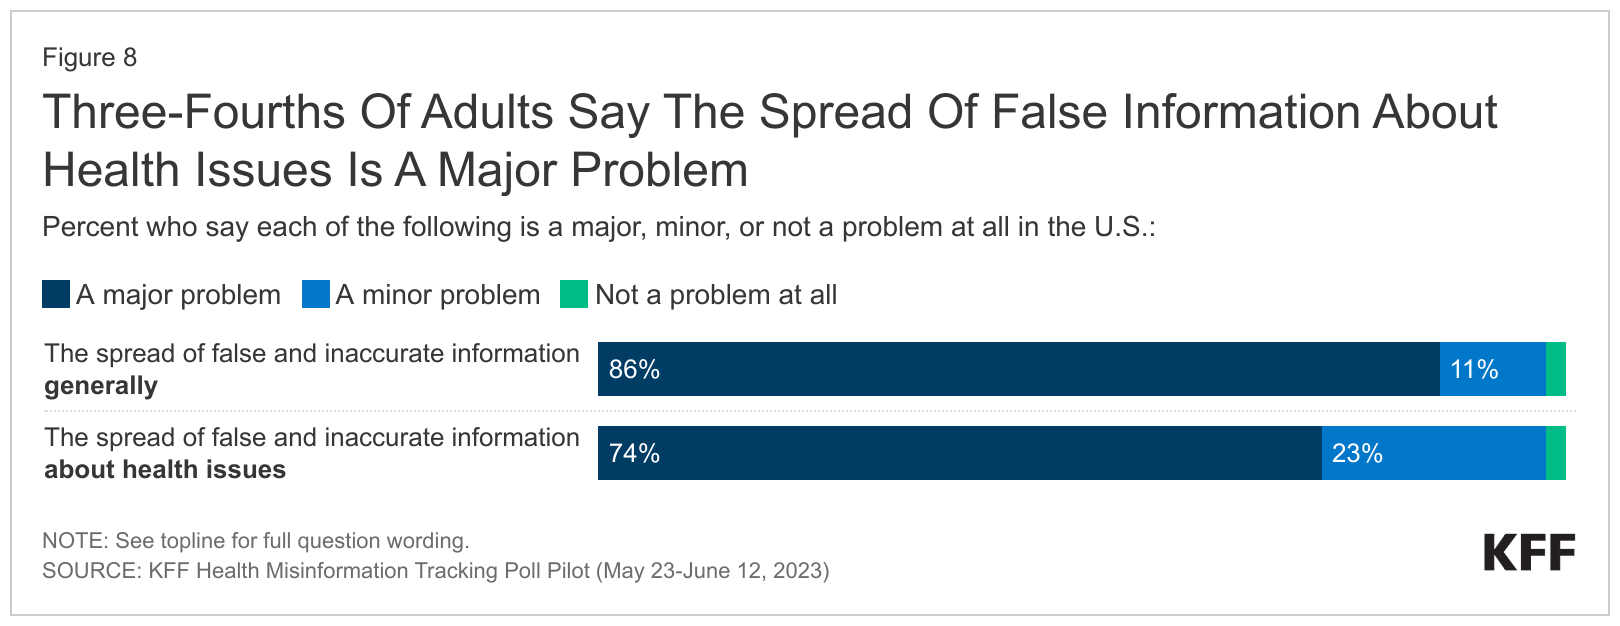 The current polarized political and media climate can lead to very different views of what constitutes misinformation.